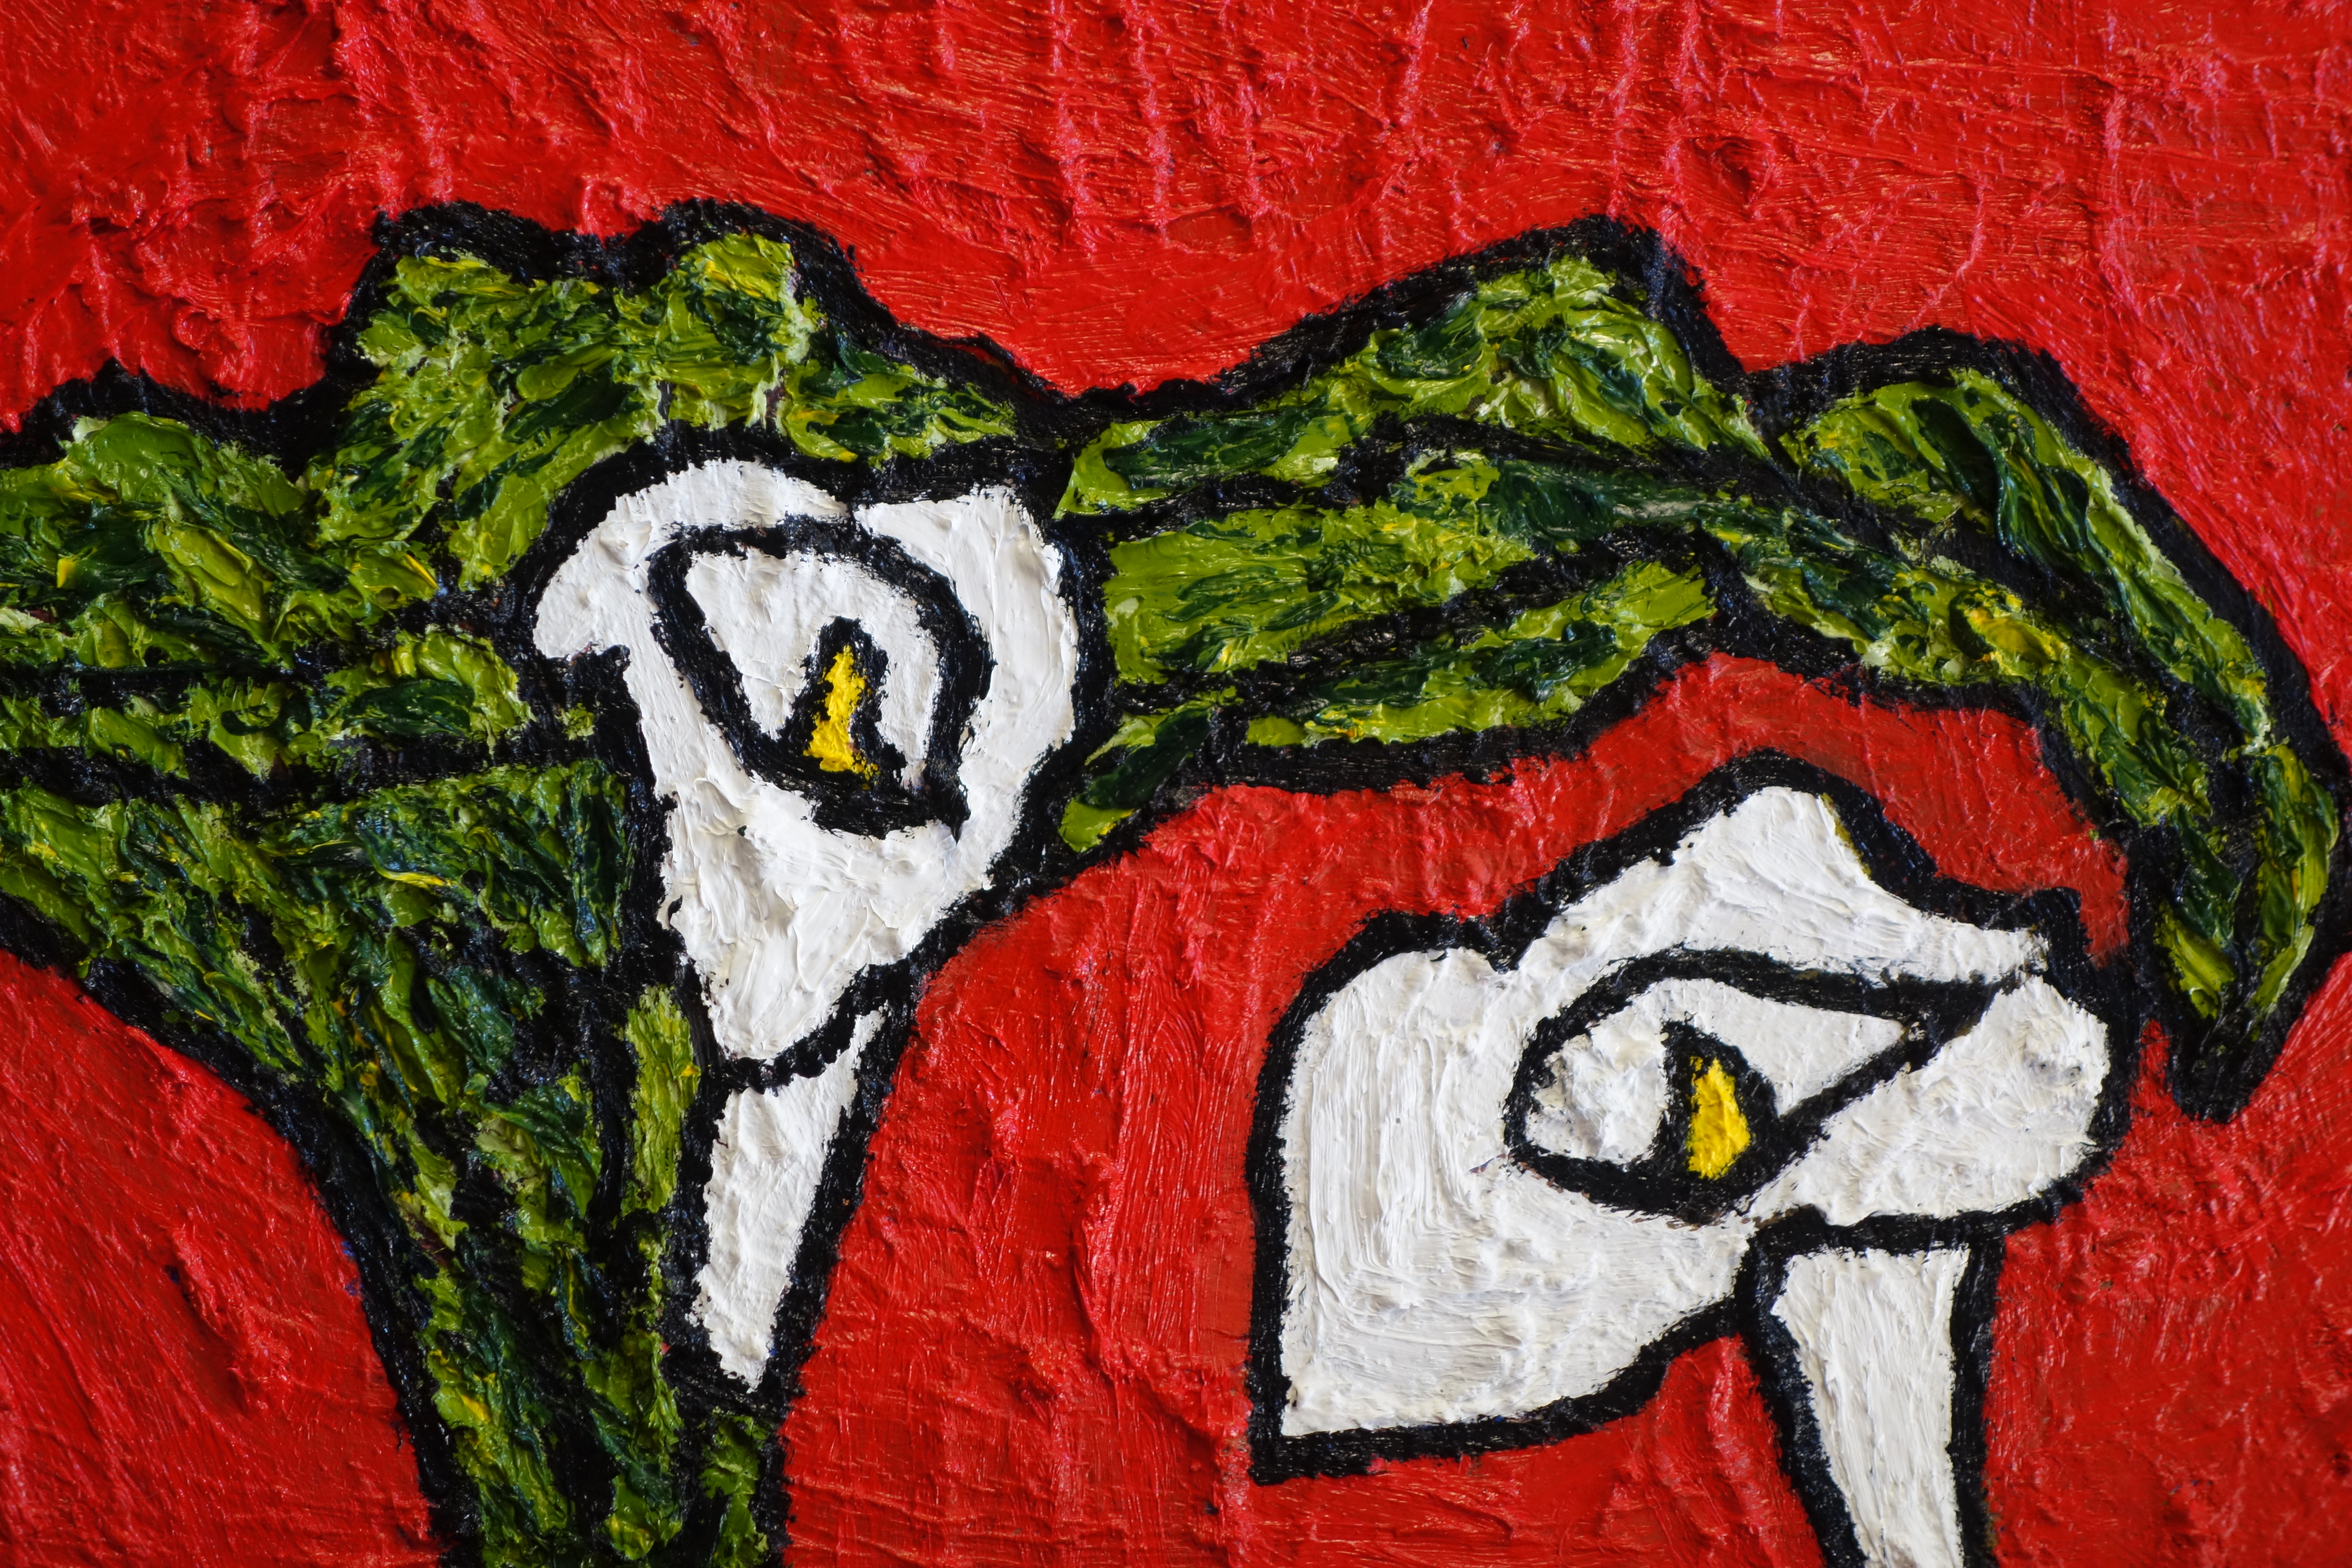 "White lillies with green leaves on a stark red background, painted on oil on canvas"